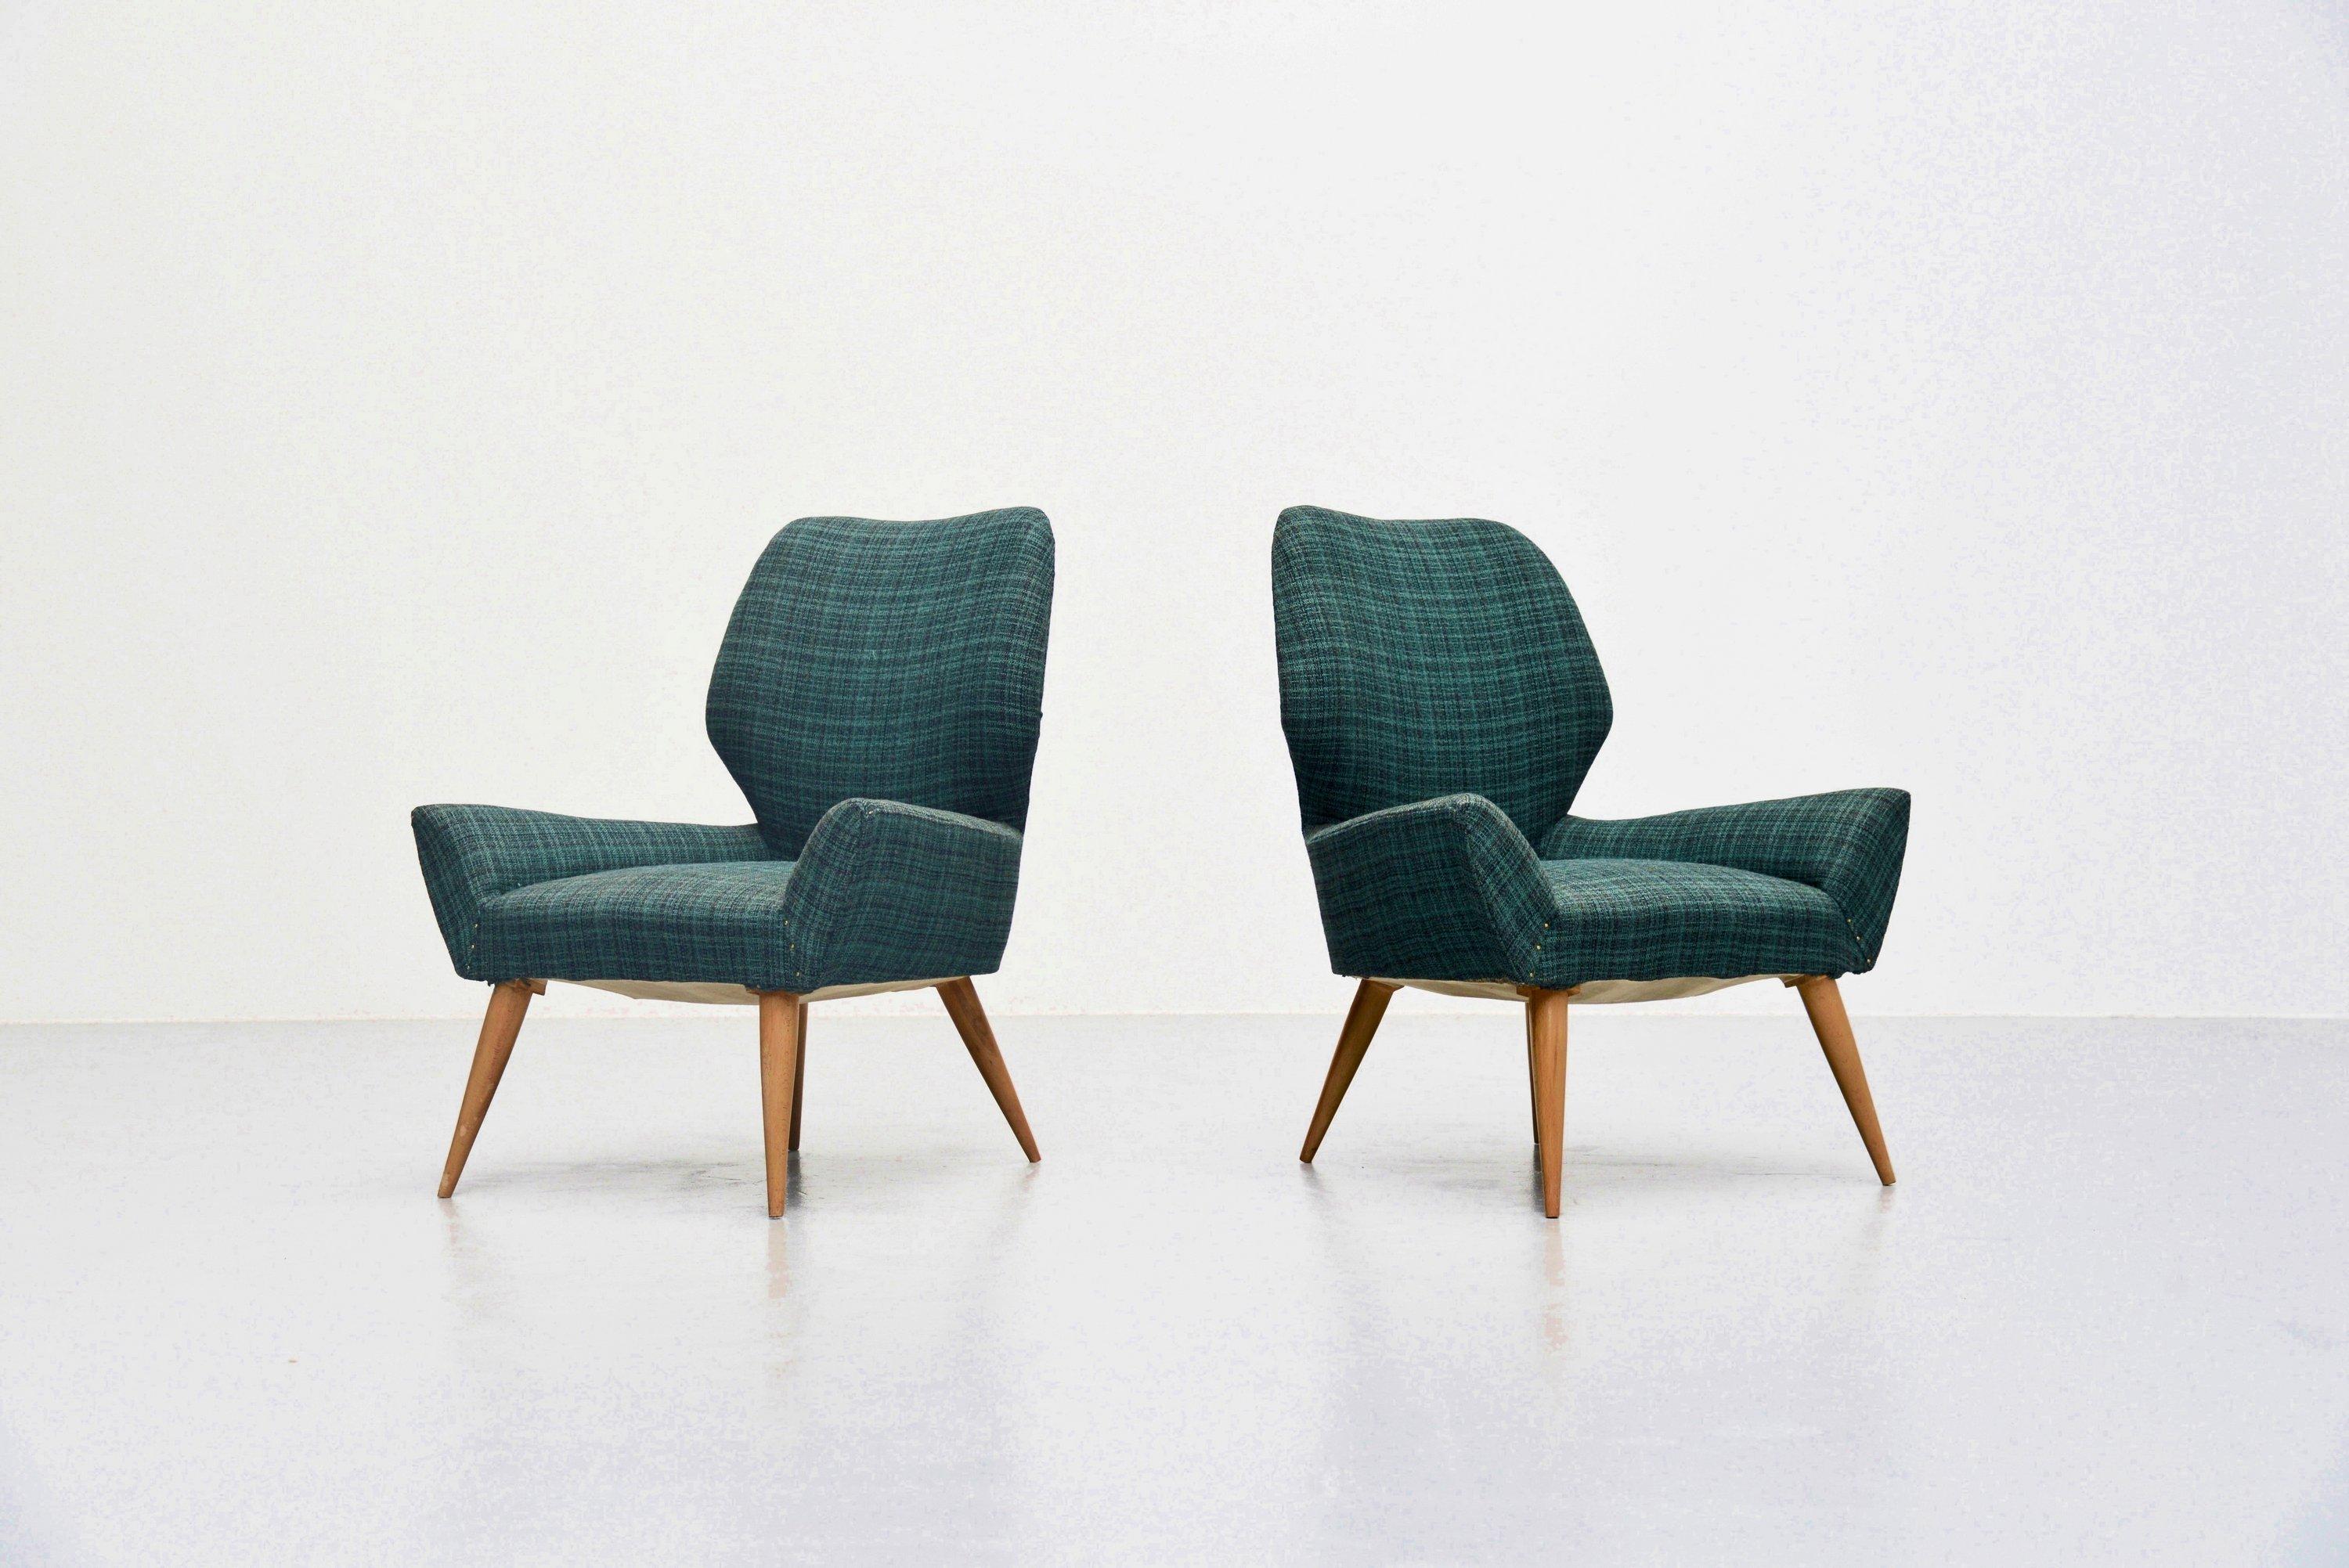 Very nice sculptural pair of low club chairs manufactured by Isa Bergamo, Italy, 1950. The chairs have beech wooden legs and still have the original green checkered upholstery which is still in nice condition. Of course this can be changed by our